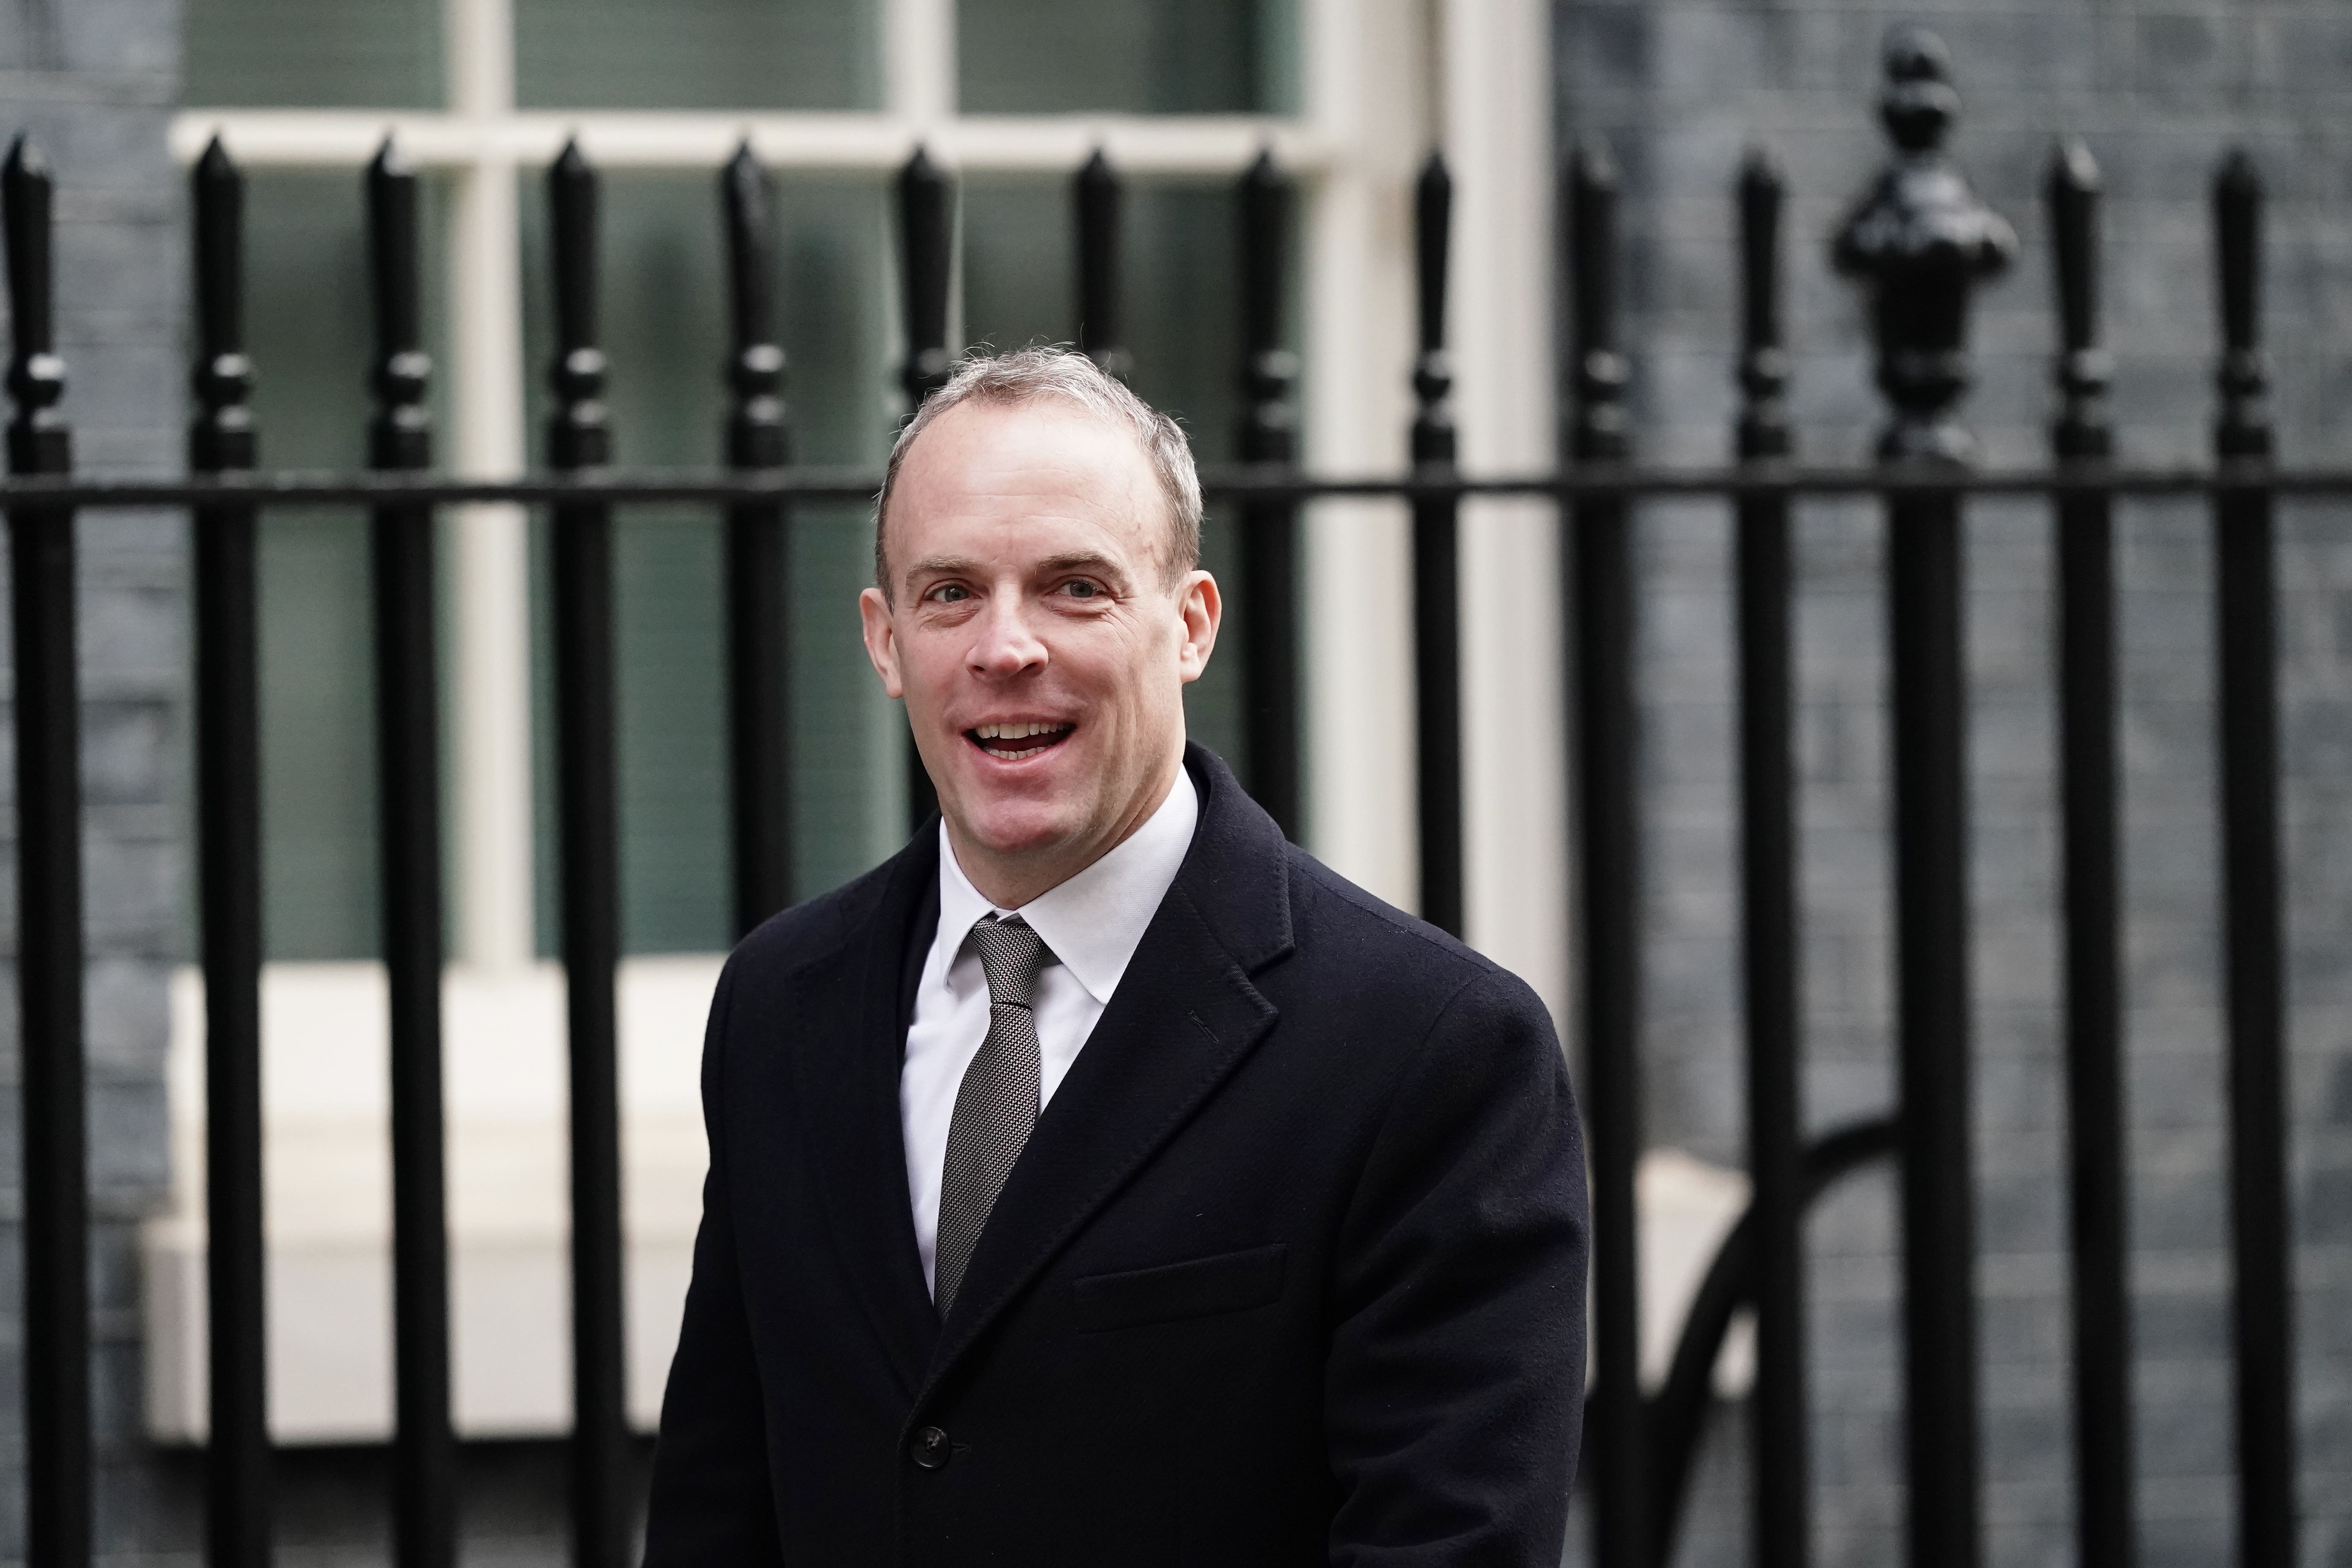 Dominic Raab’s constituency also saw local election gains for the Lib Dems